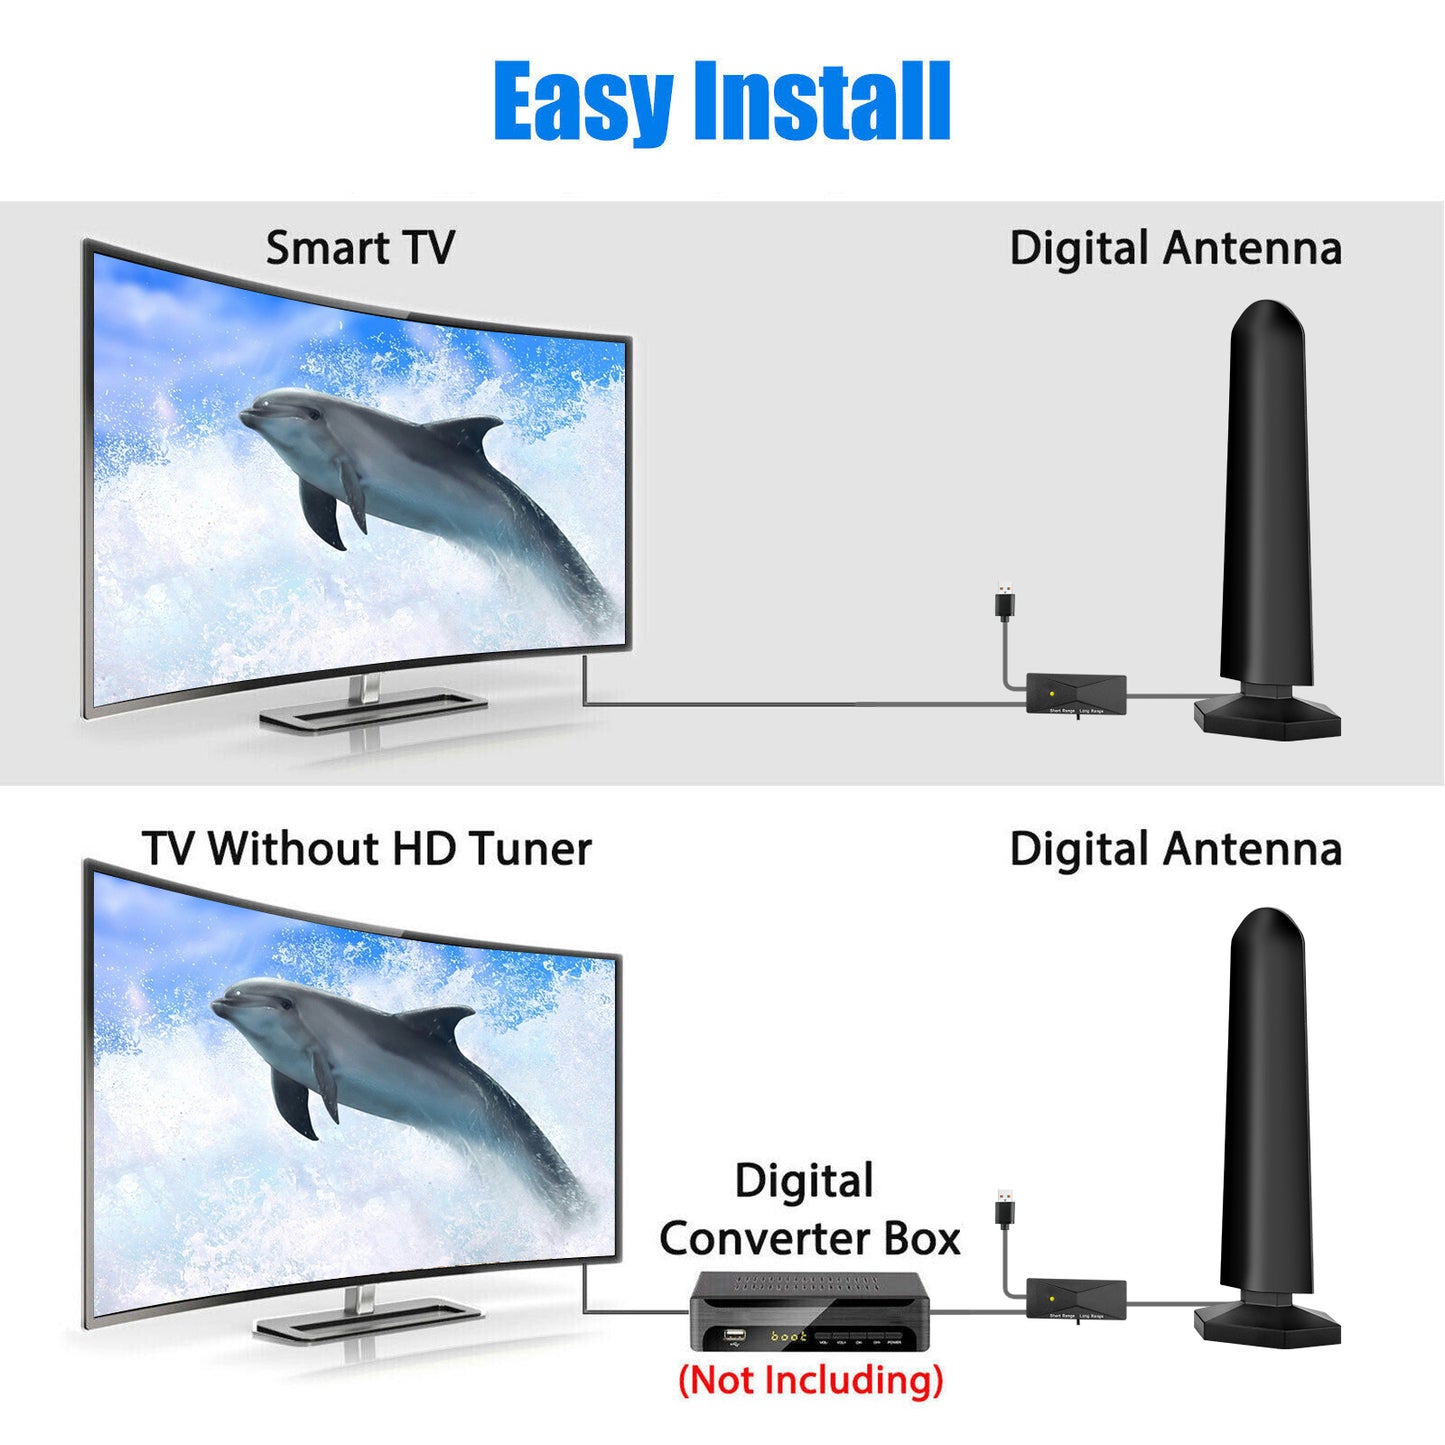 4K HDTV Antenna Indoor HD Digital TV Signal Amplifier Booster - Indoor 400+ Miles Range and Extended 16.4ft Coaxial Cable (Black)